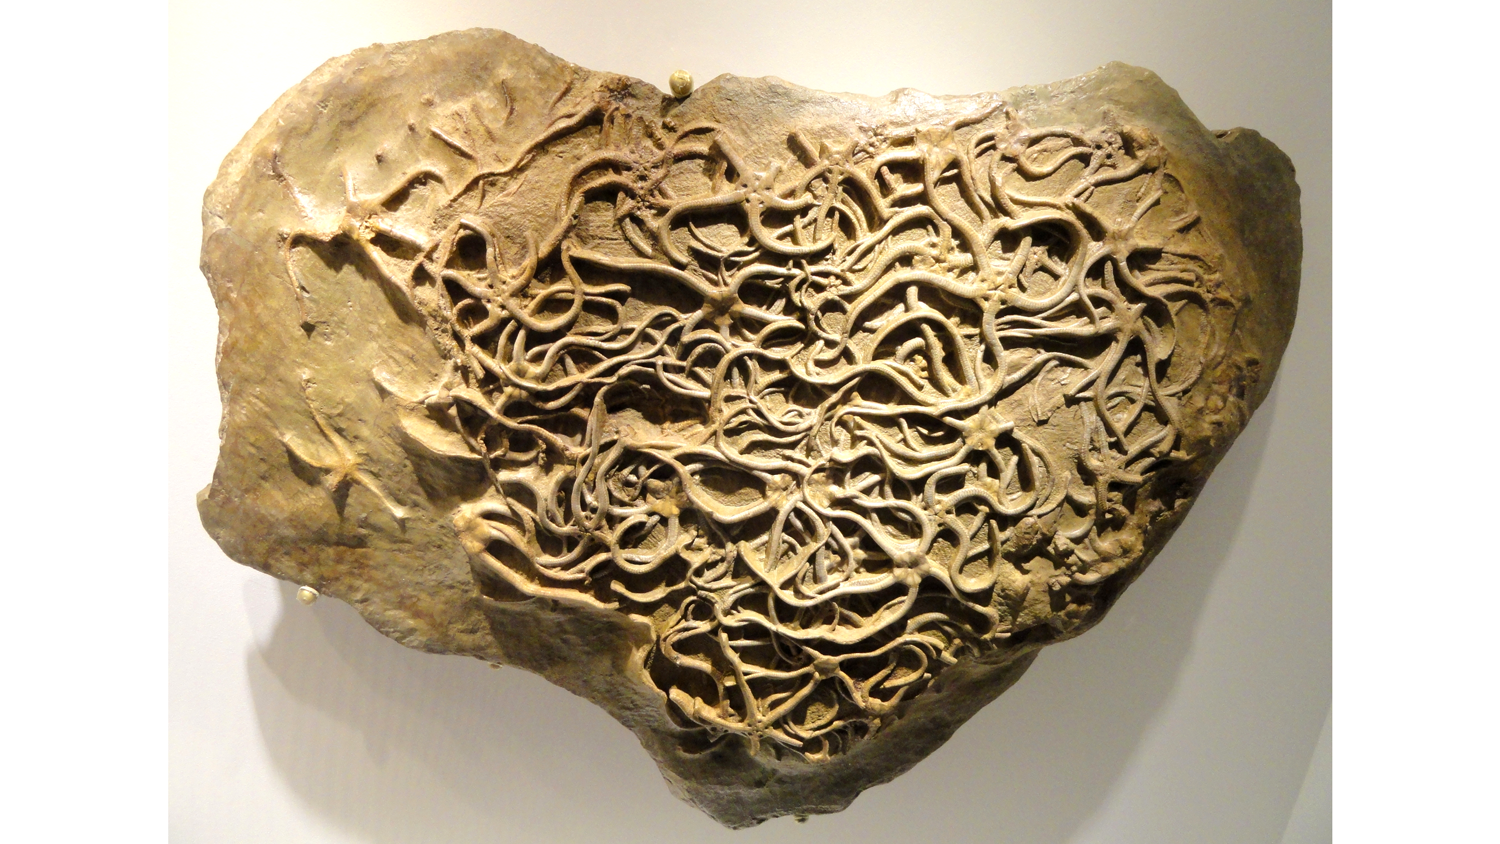 Photograph of Paleocoma egertoni brittle stars from the Jurassic of England